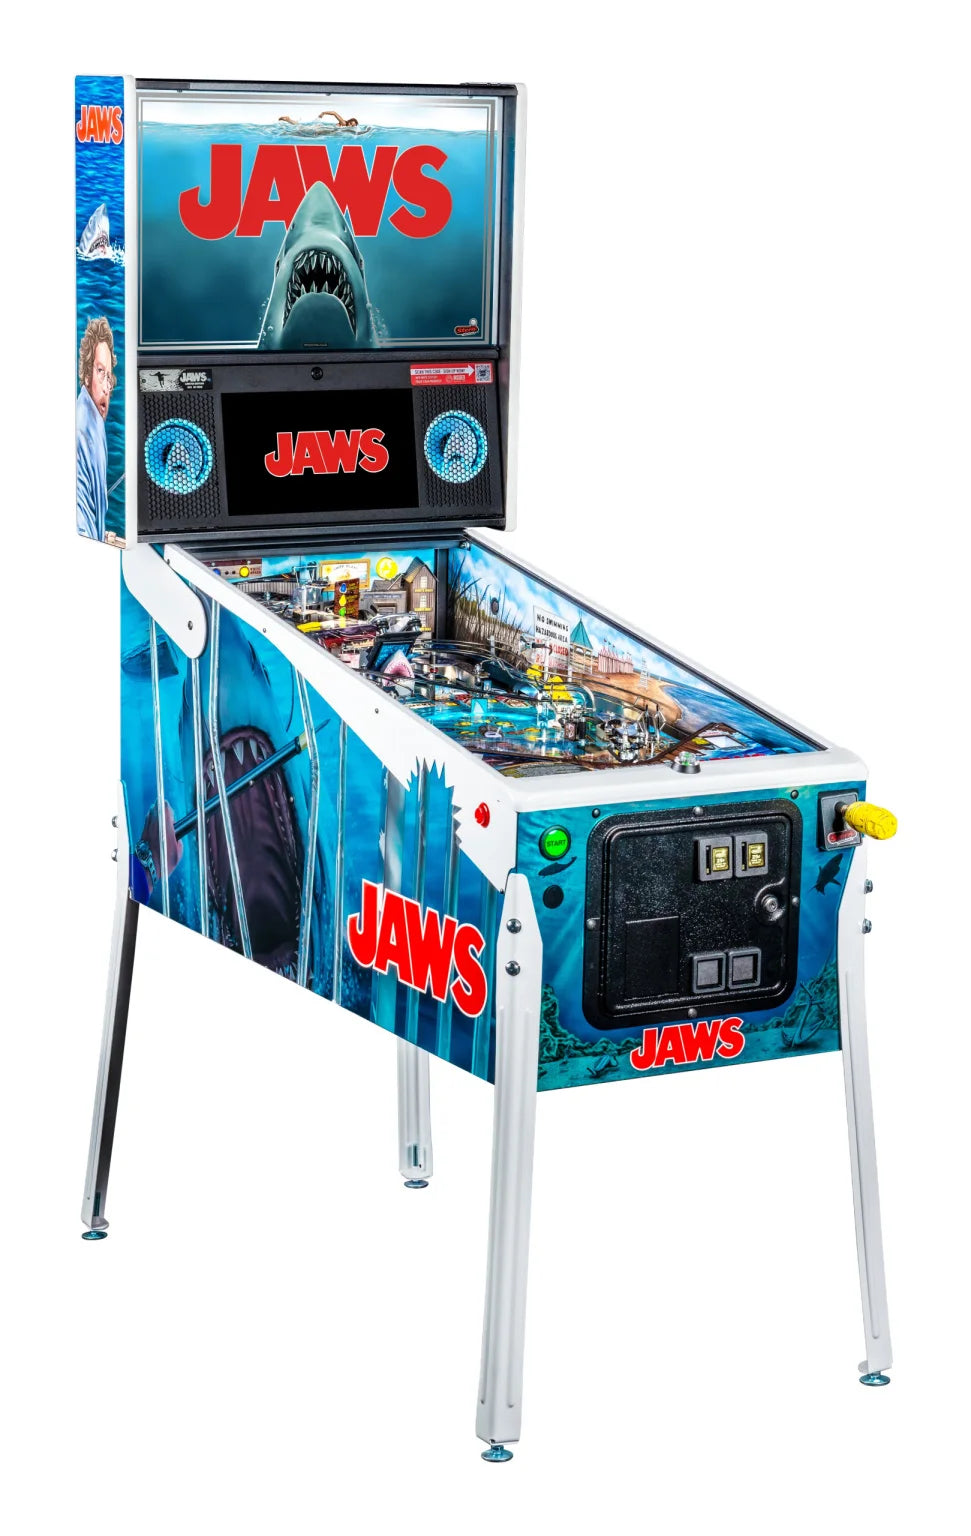 JAWS Limited Edition LE Pinball Machine by Stern